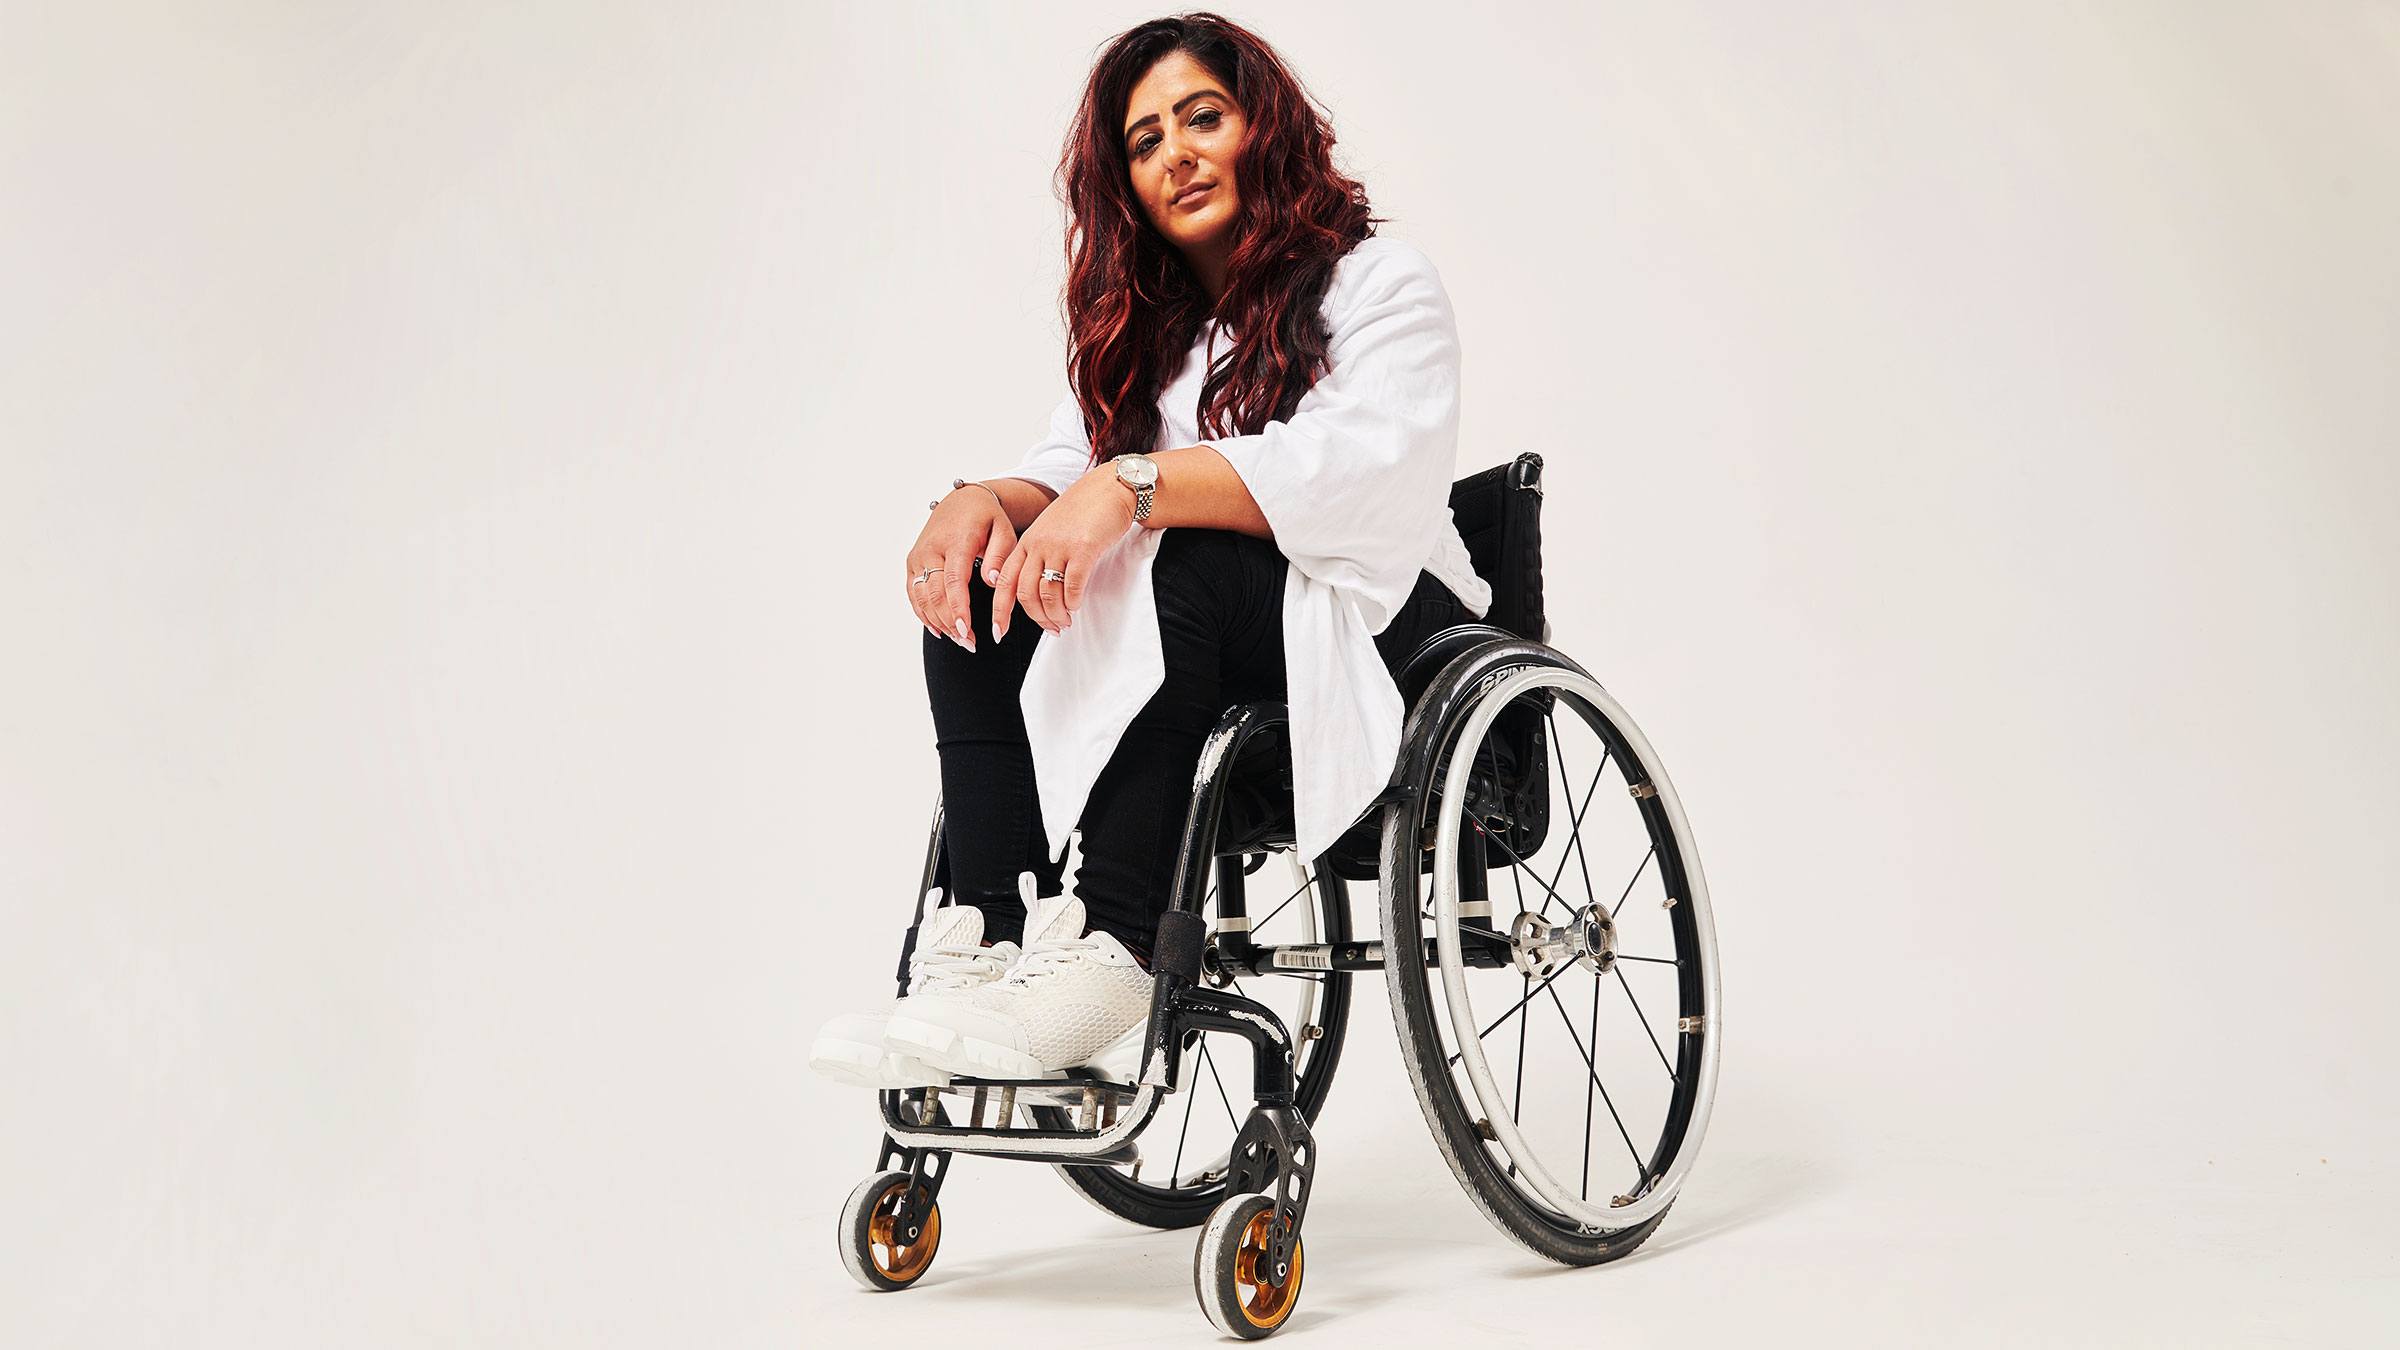 Women in a wheel chair modelling adaptive clothing